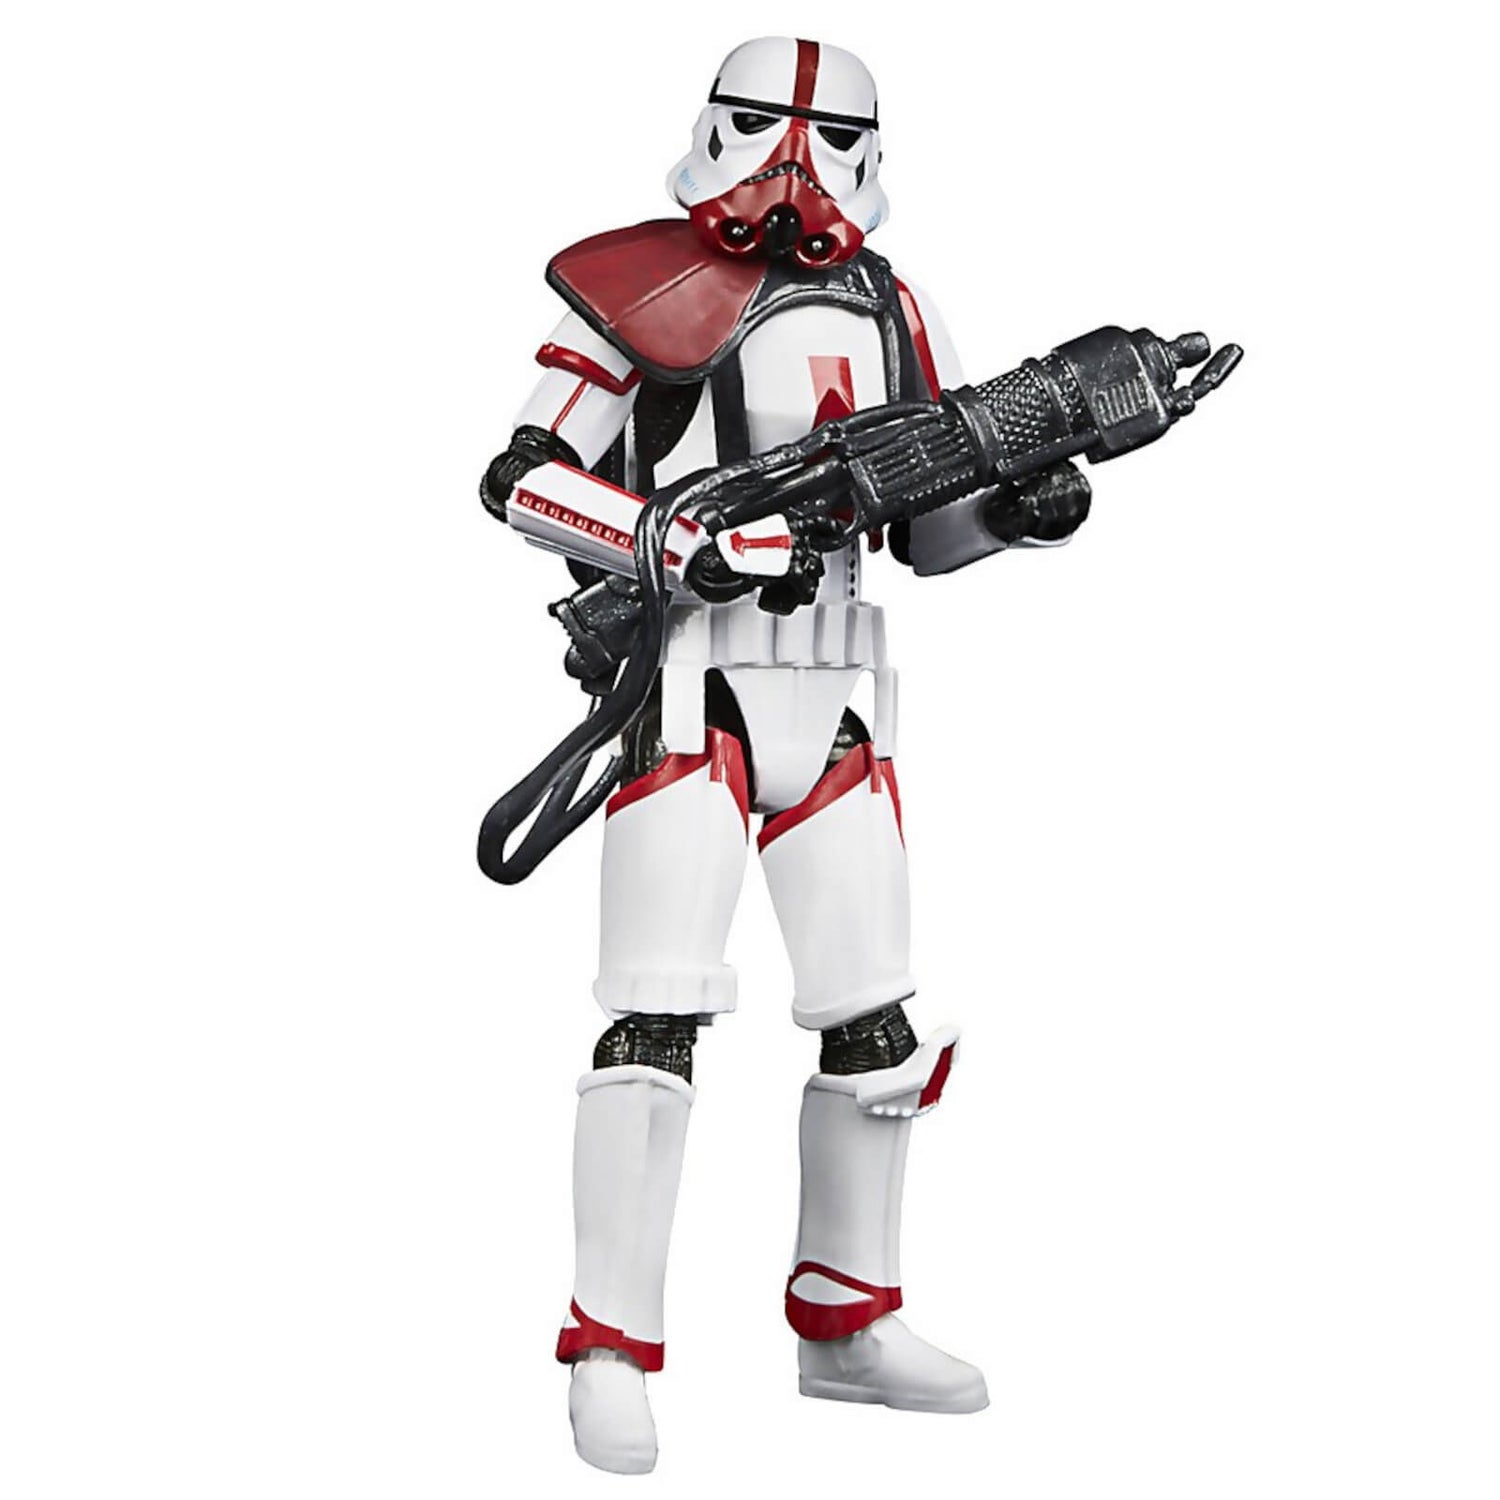 Hasbro Star Wars The Vintage Collection Incinerator Trooper 3.75-inch Scale The Mandalorian Figure